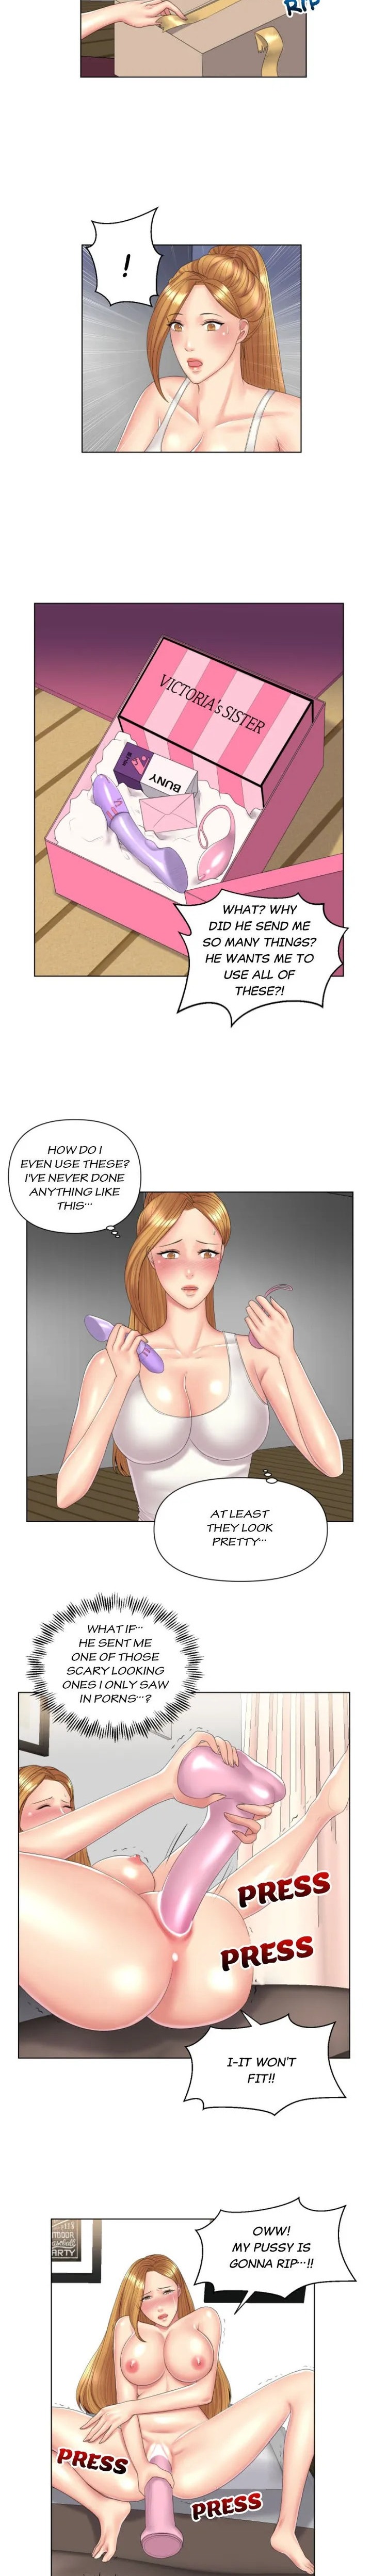 Sneaky Deal - Chapter 5 Page 3